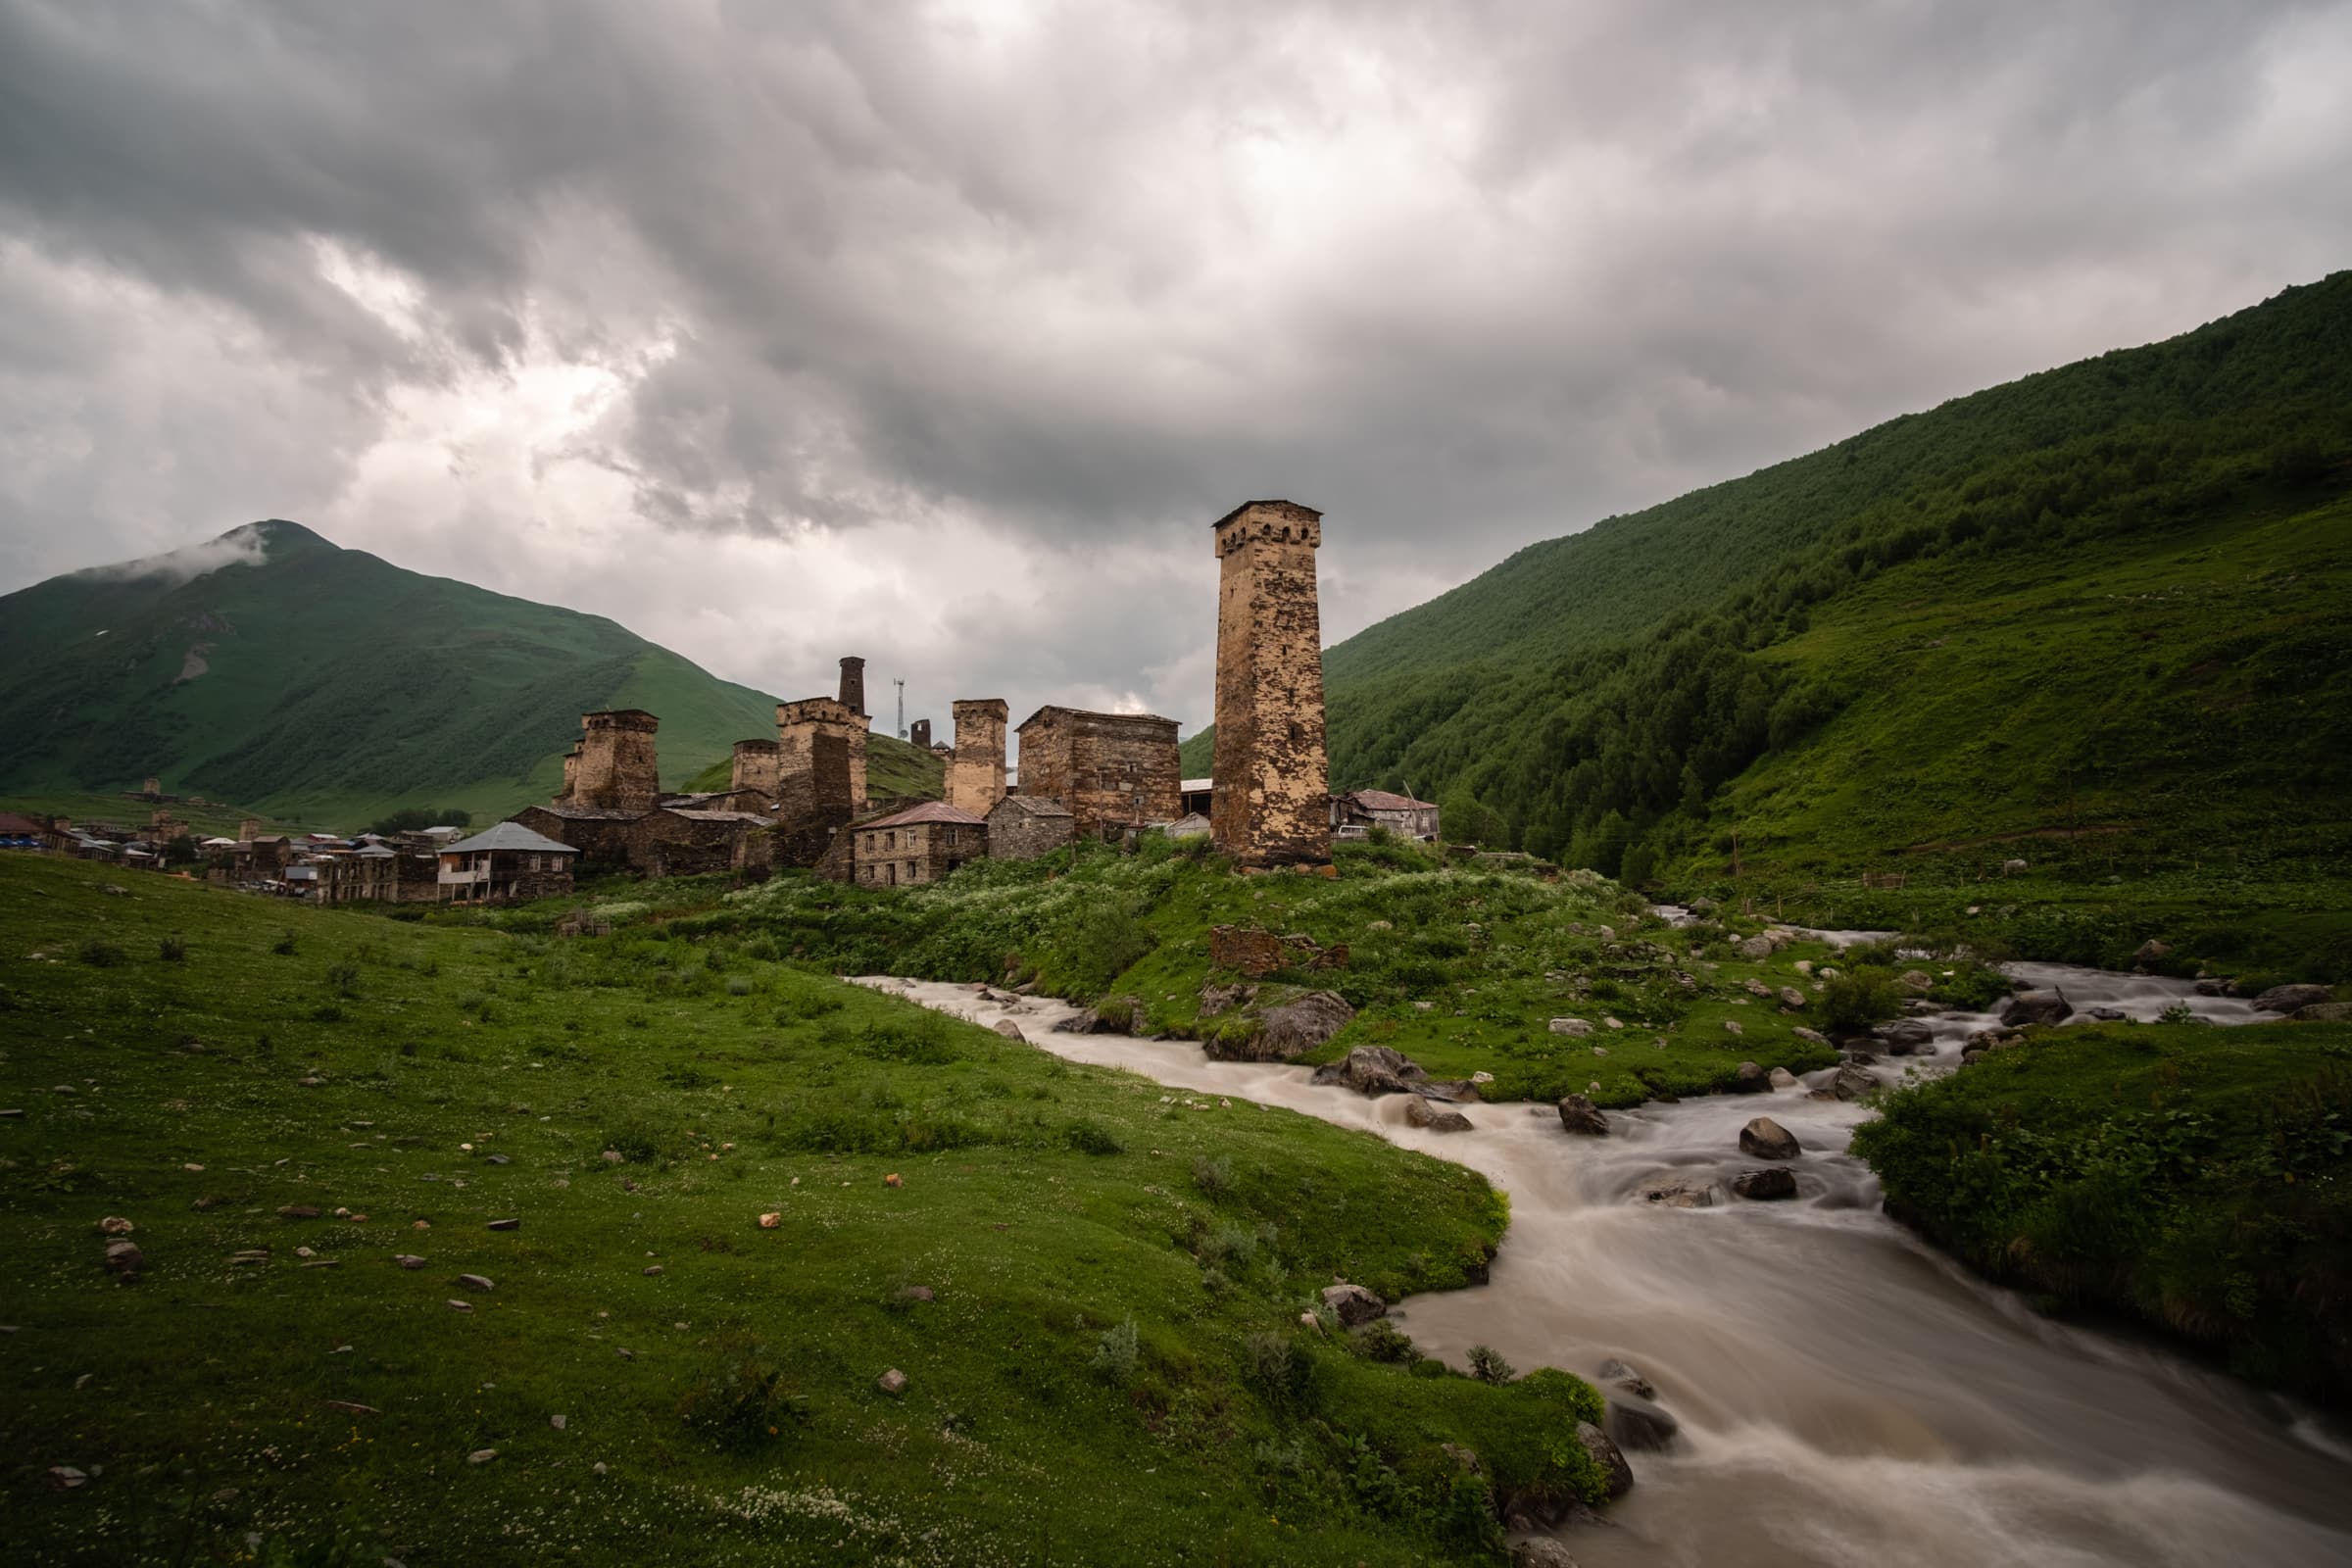 Long exposure at the conversion of two rivers below the settlement of Chazhashi in Ushguli